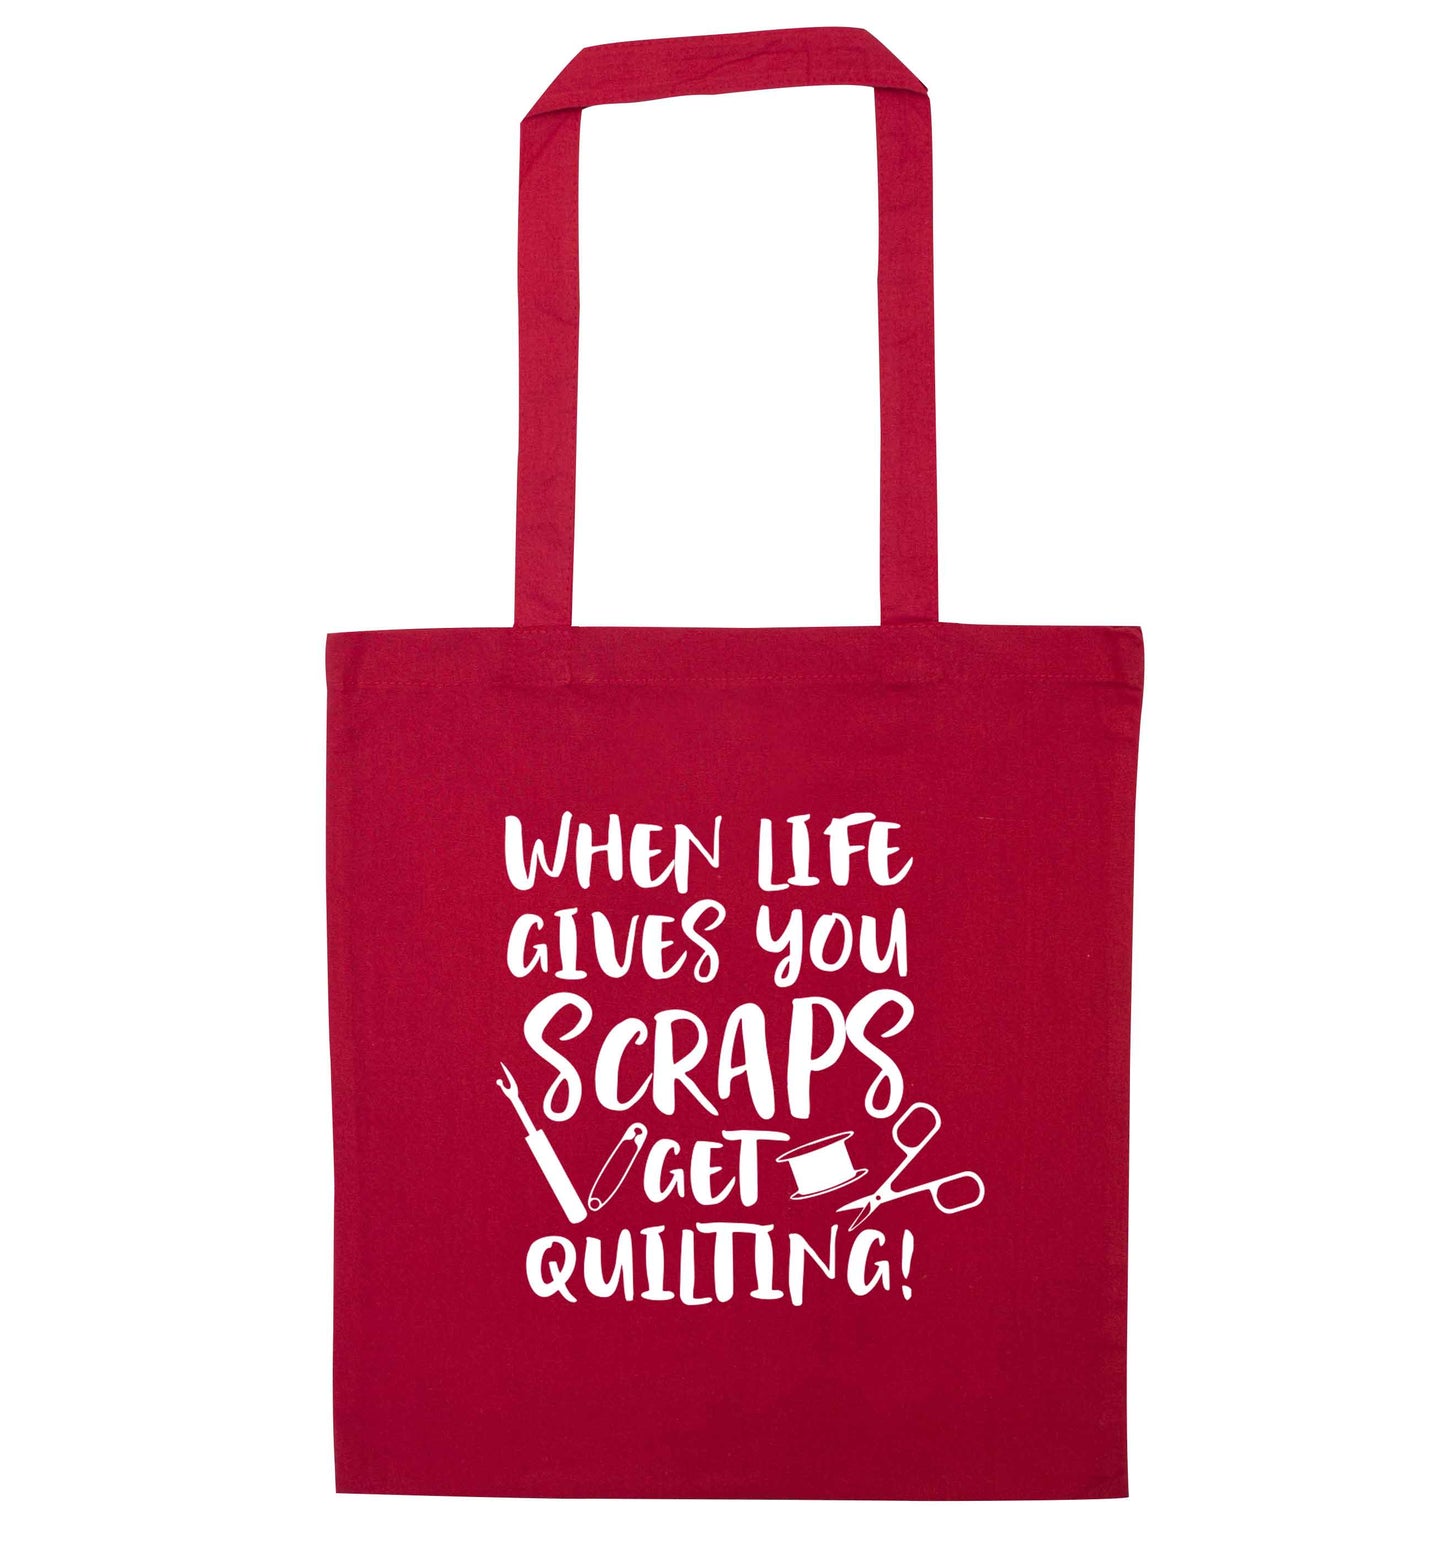 When life gives you scraps get quilting! red tote bag